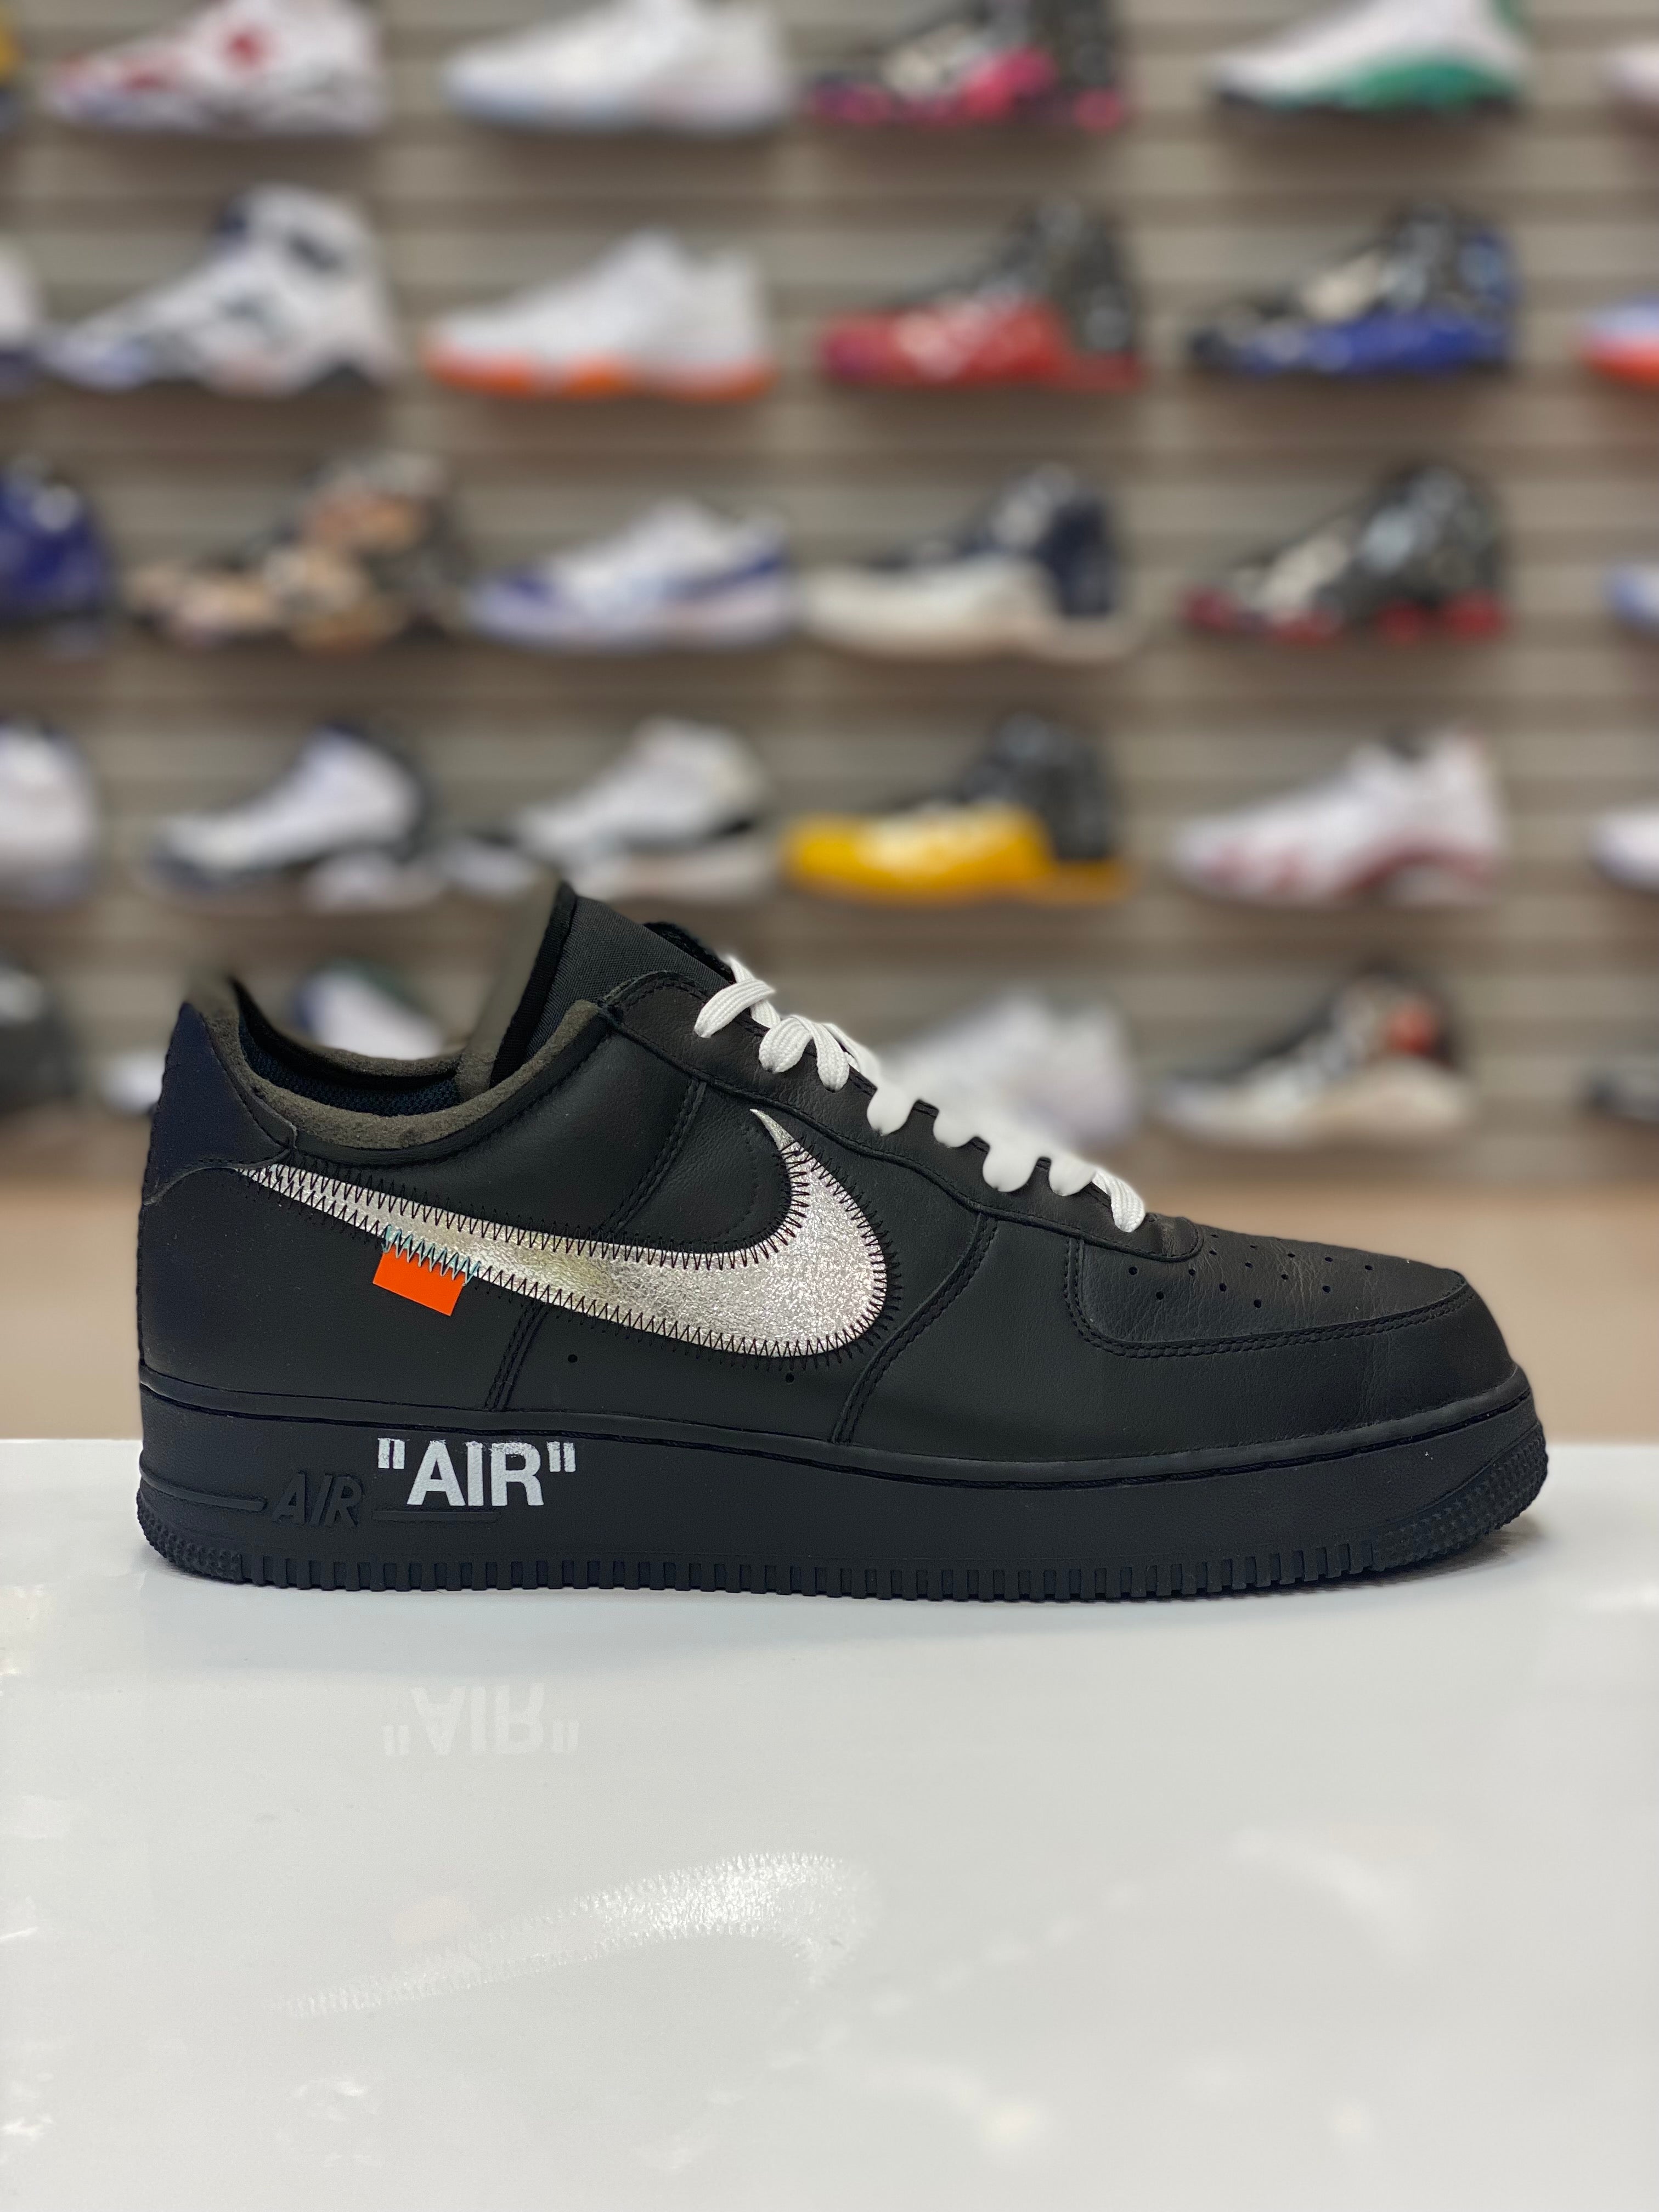 Brand New Nike Air Force 1 Off White Moma Available In Store Now! Size 13